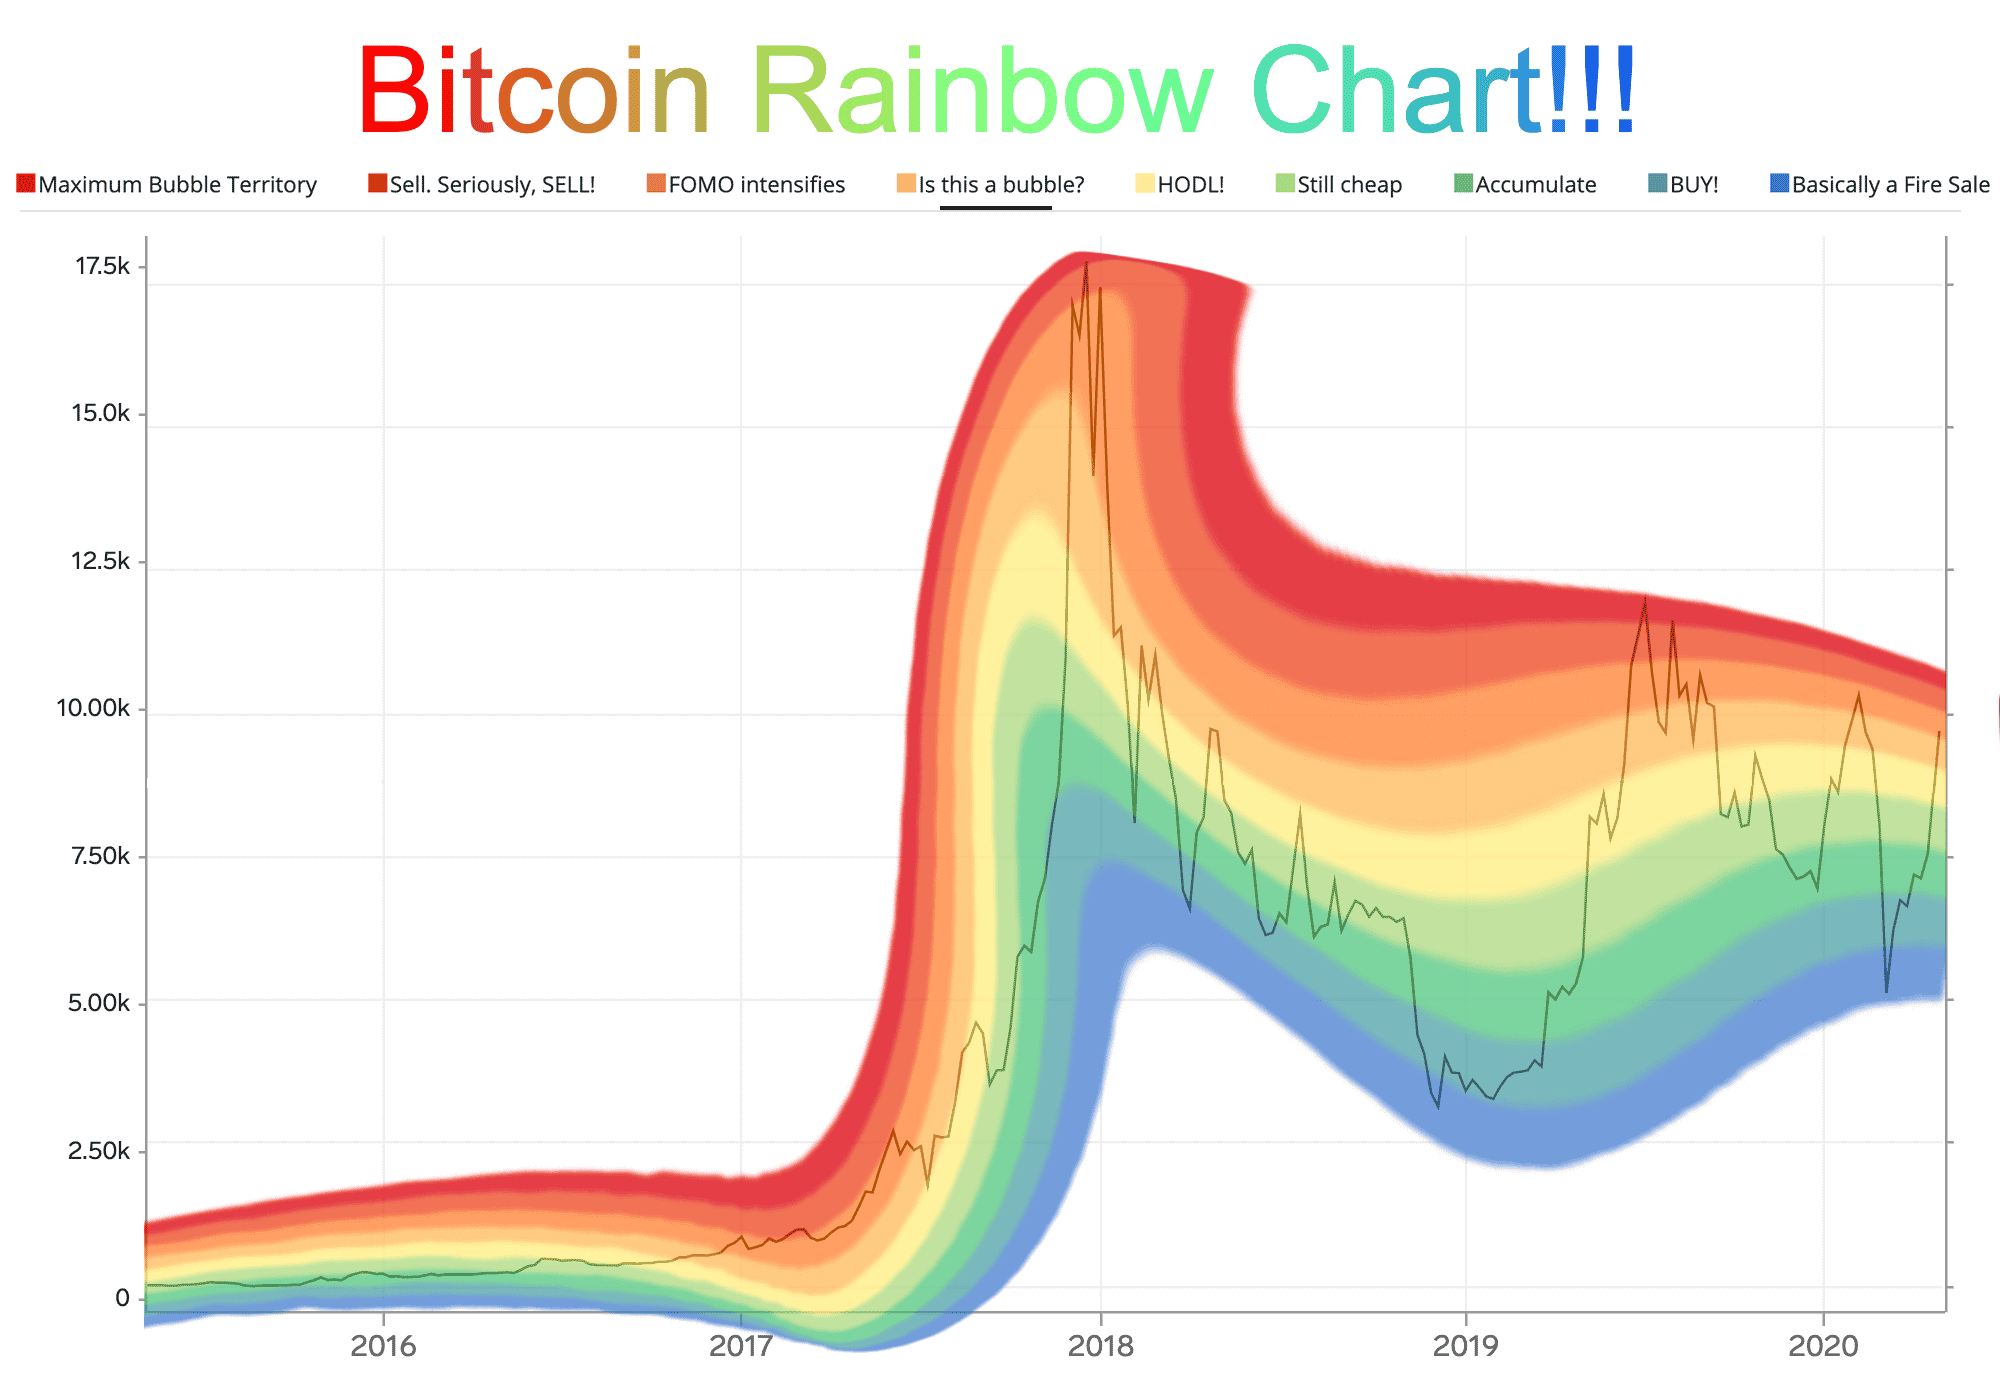 What is the Bitcoin rainbow chart, and how does it work?